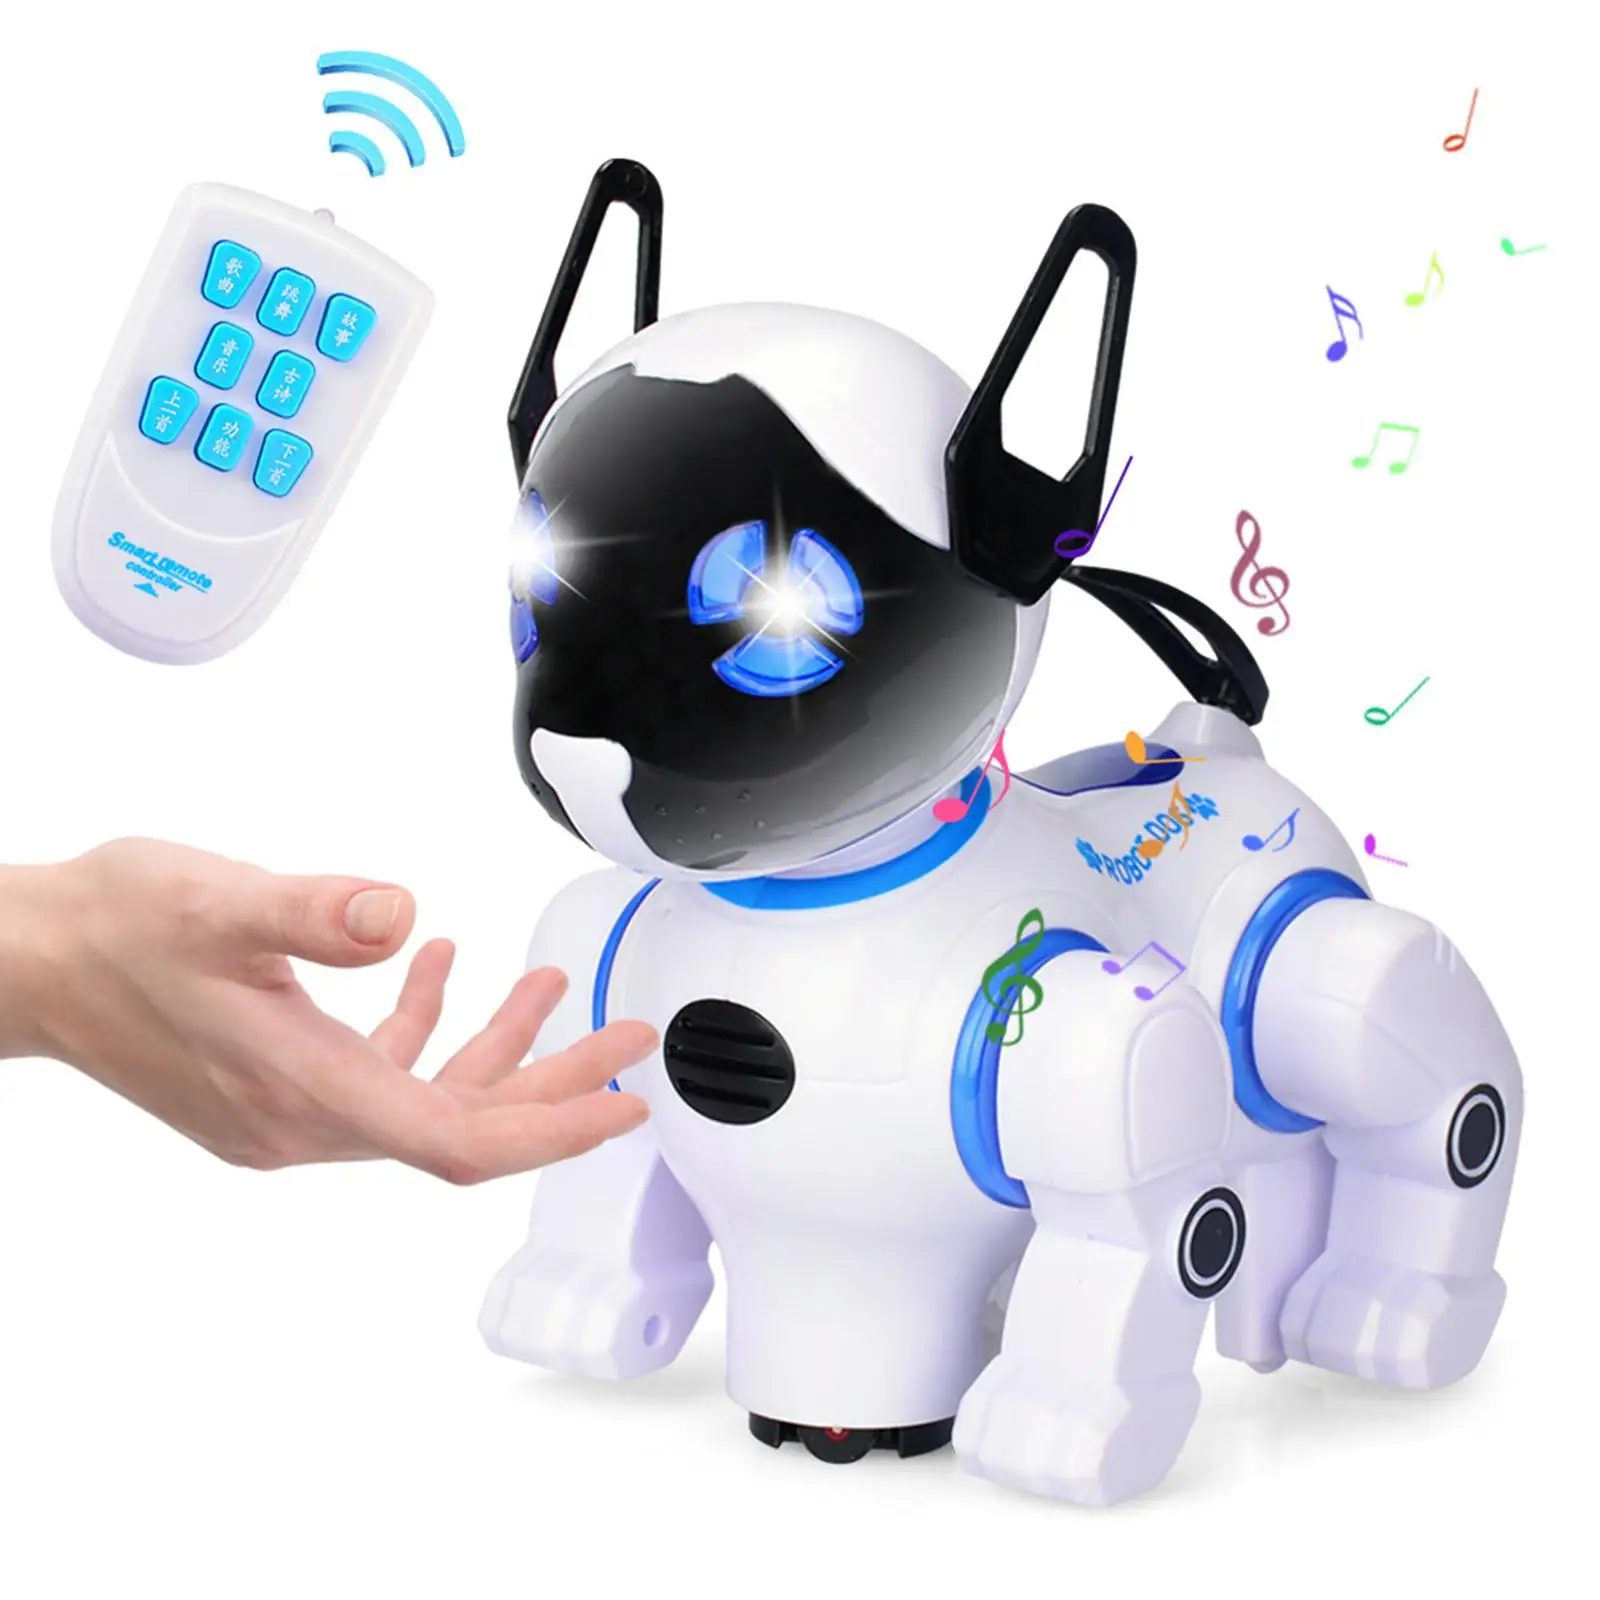  Remote Control Robot Dog Toy Electronic Toys Xfor Boys And Girls Age 5 6 7 8 9 10 Children Birthday Gift